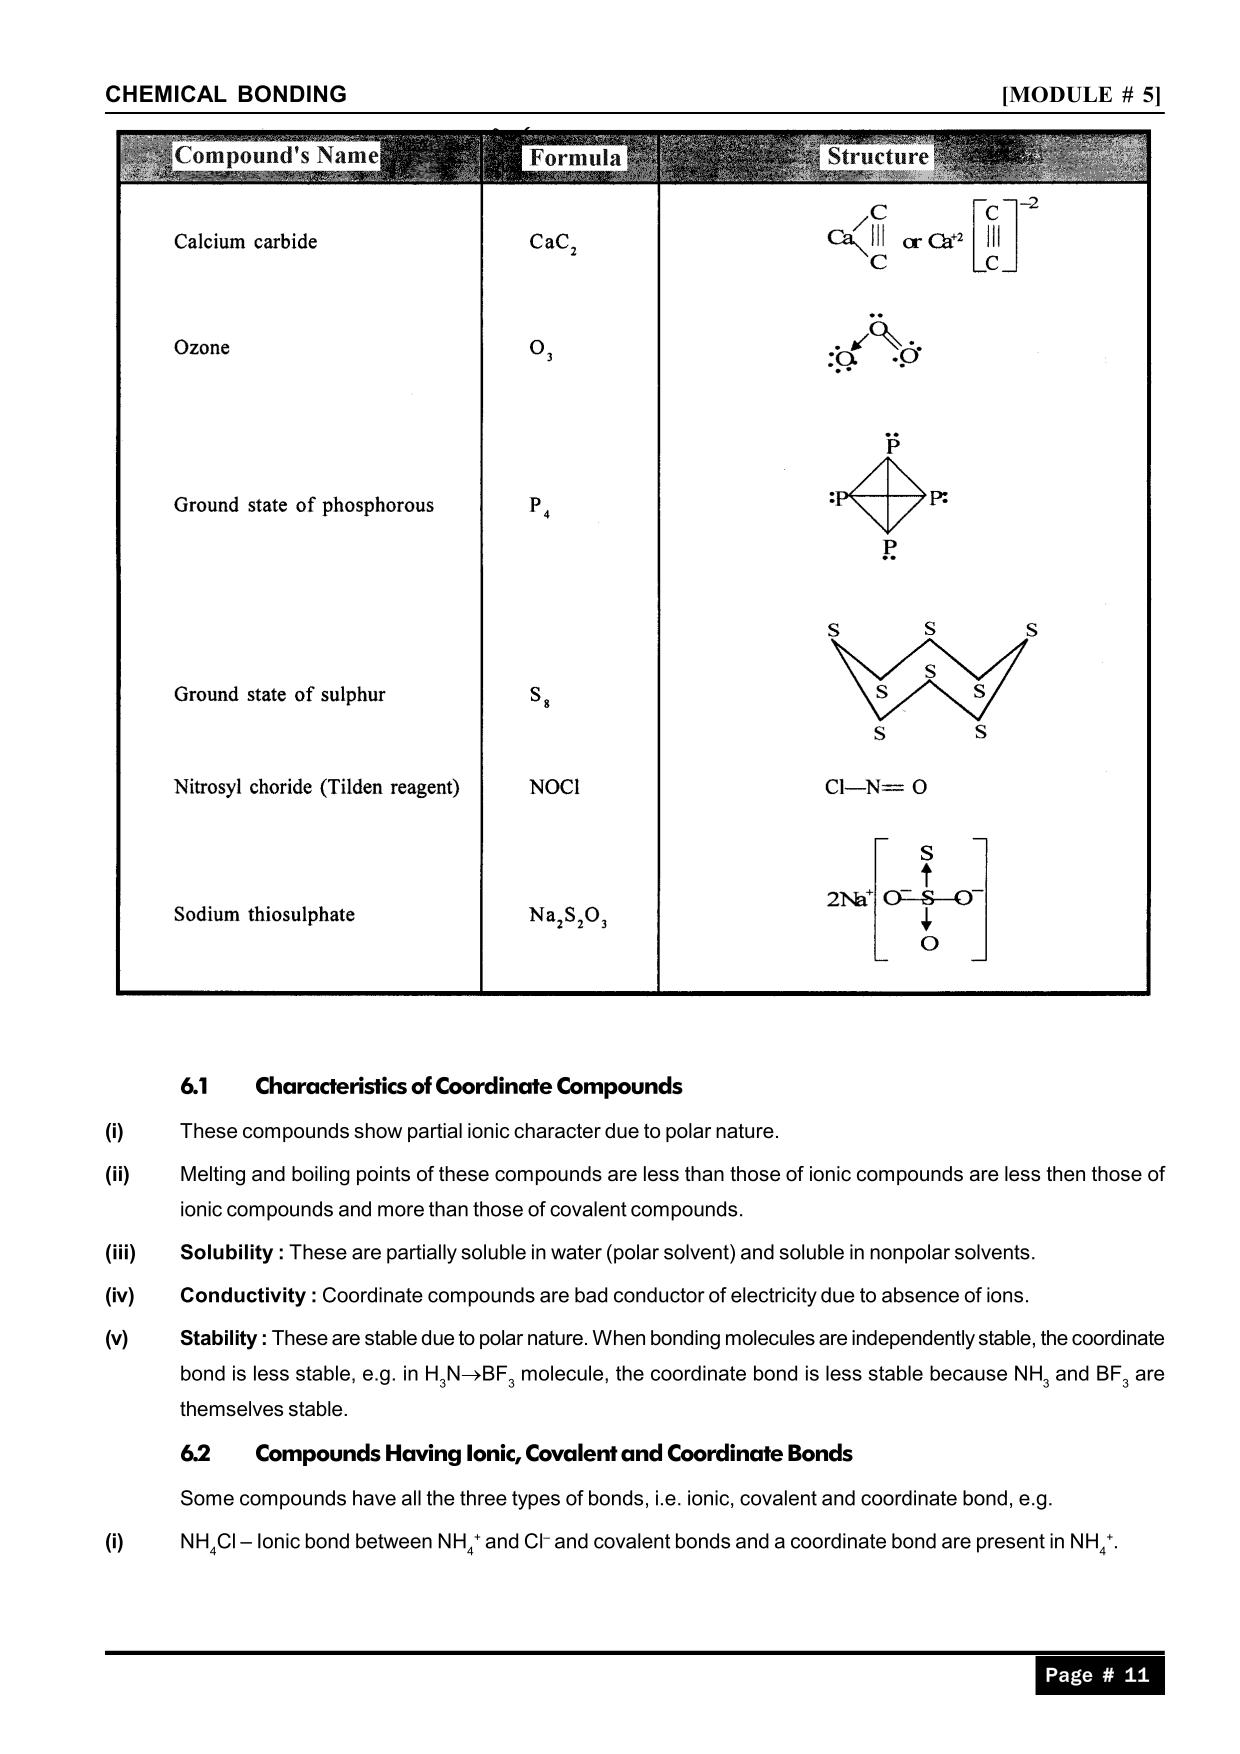 Chemical Bonding and Molecular Structure Notes: Characteristics 